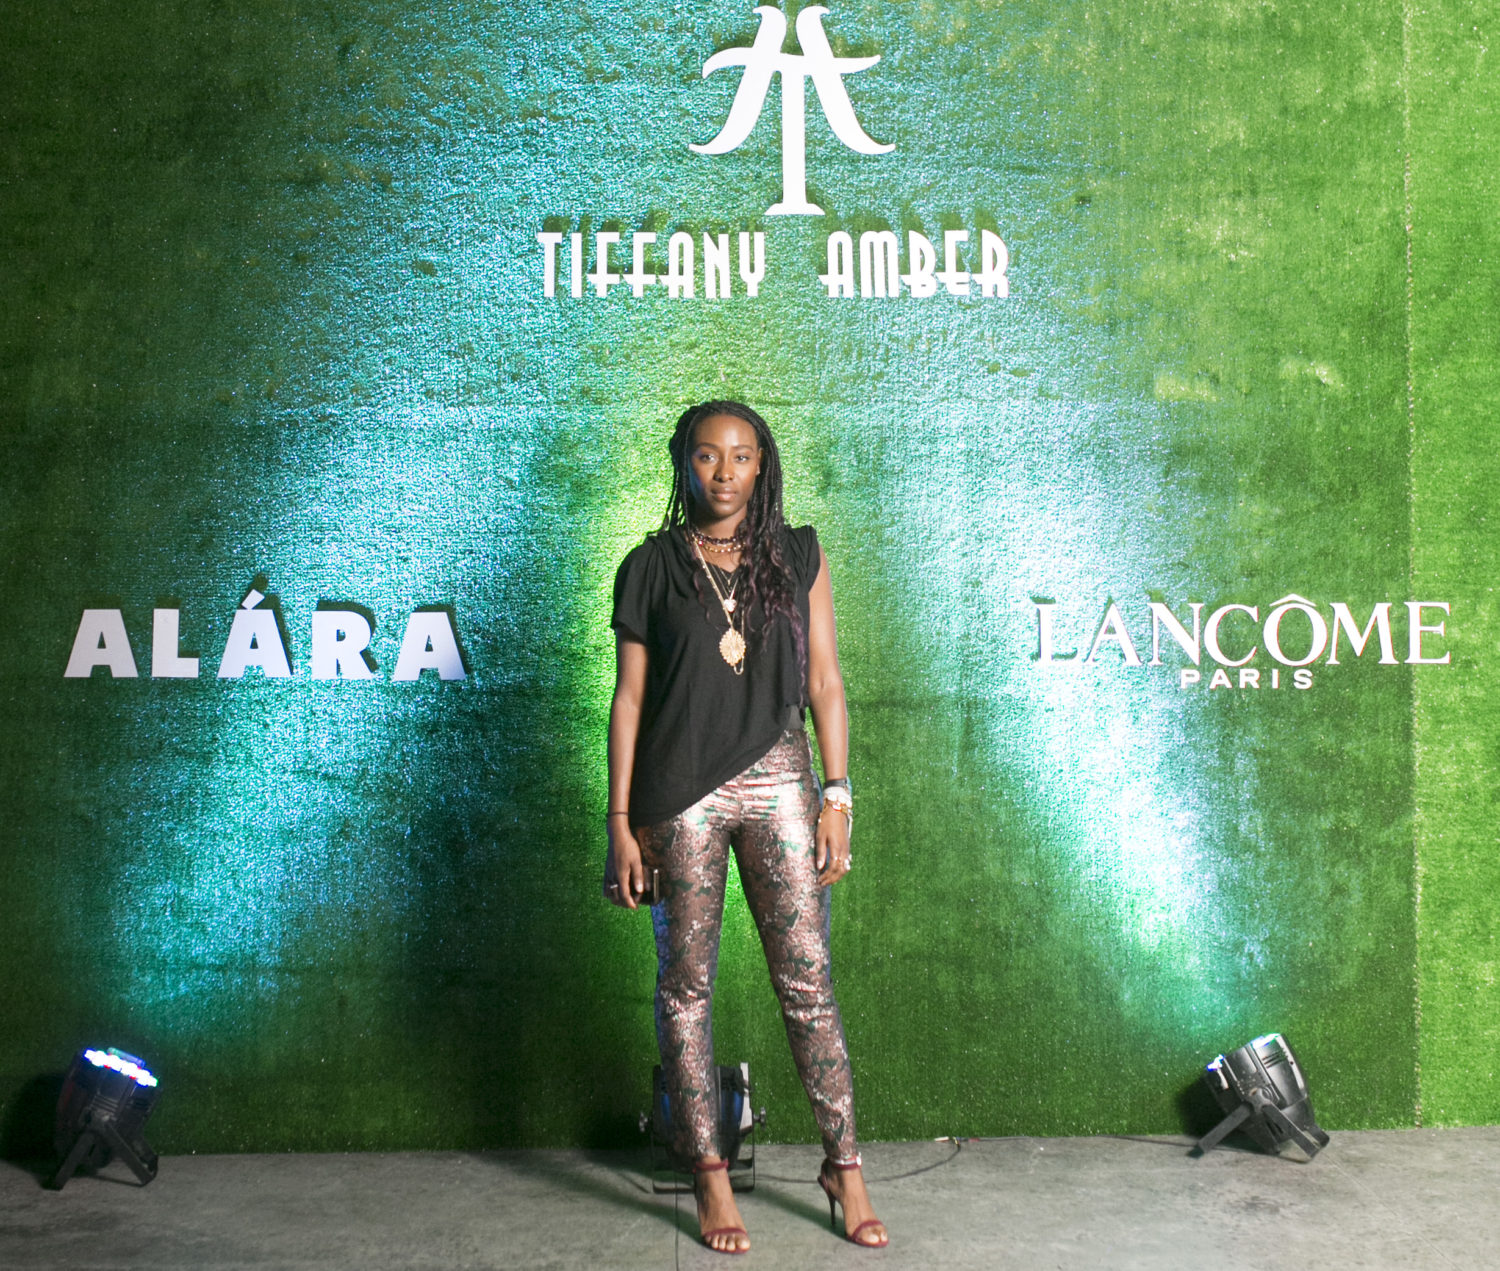 Tiffany Amber Celebrated Her 20th Anniversary at Alara, See all The Fun Red Carpet Moments You Missed!